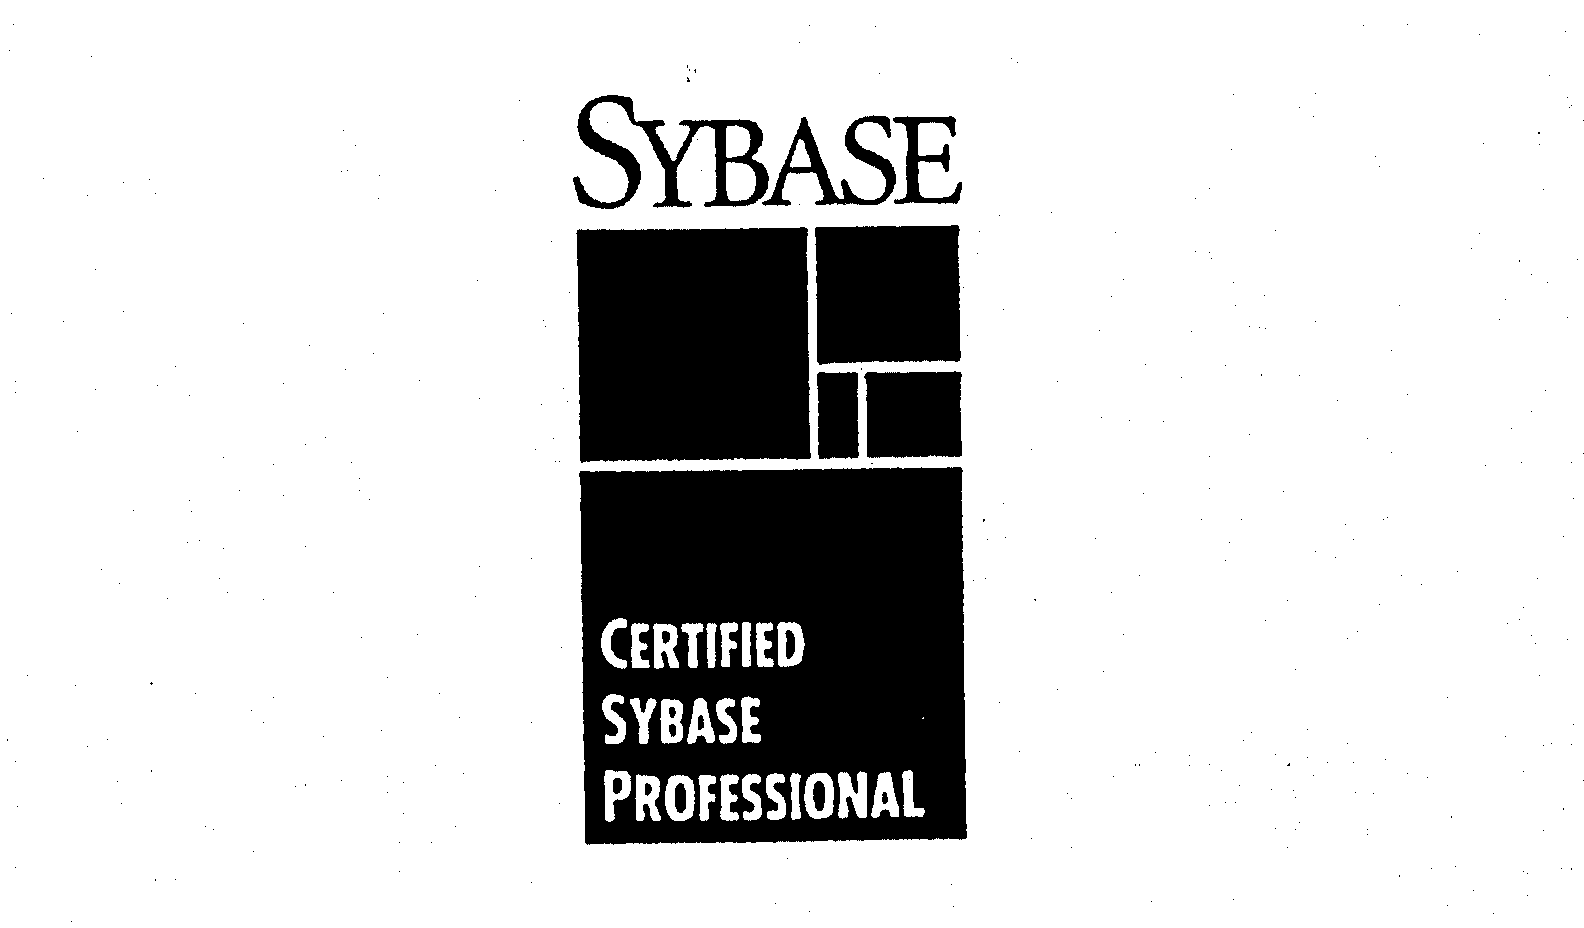  SYBASE CERTIFIED SYBASE PROFESSIONAL